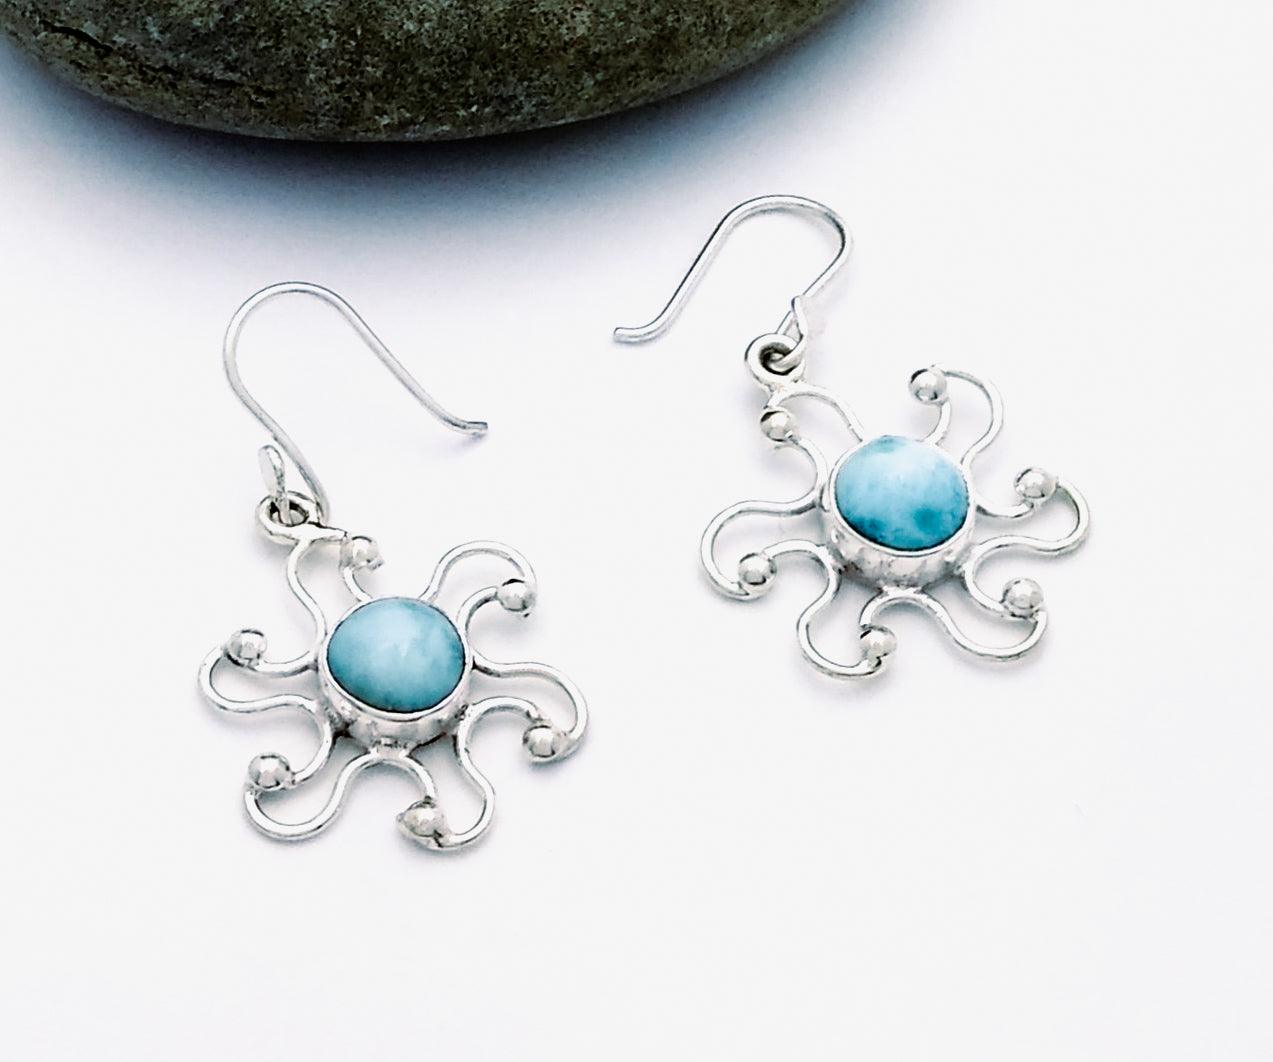 Sterling sun drop earrings with a circular larimar stone in the center. Each has 6 curved rays with a ball on the end of each.